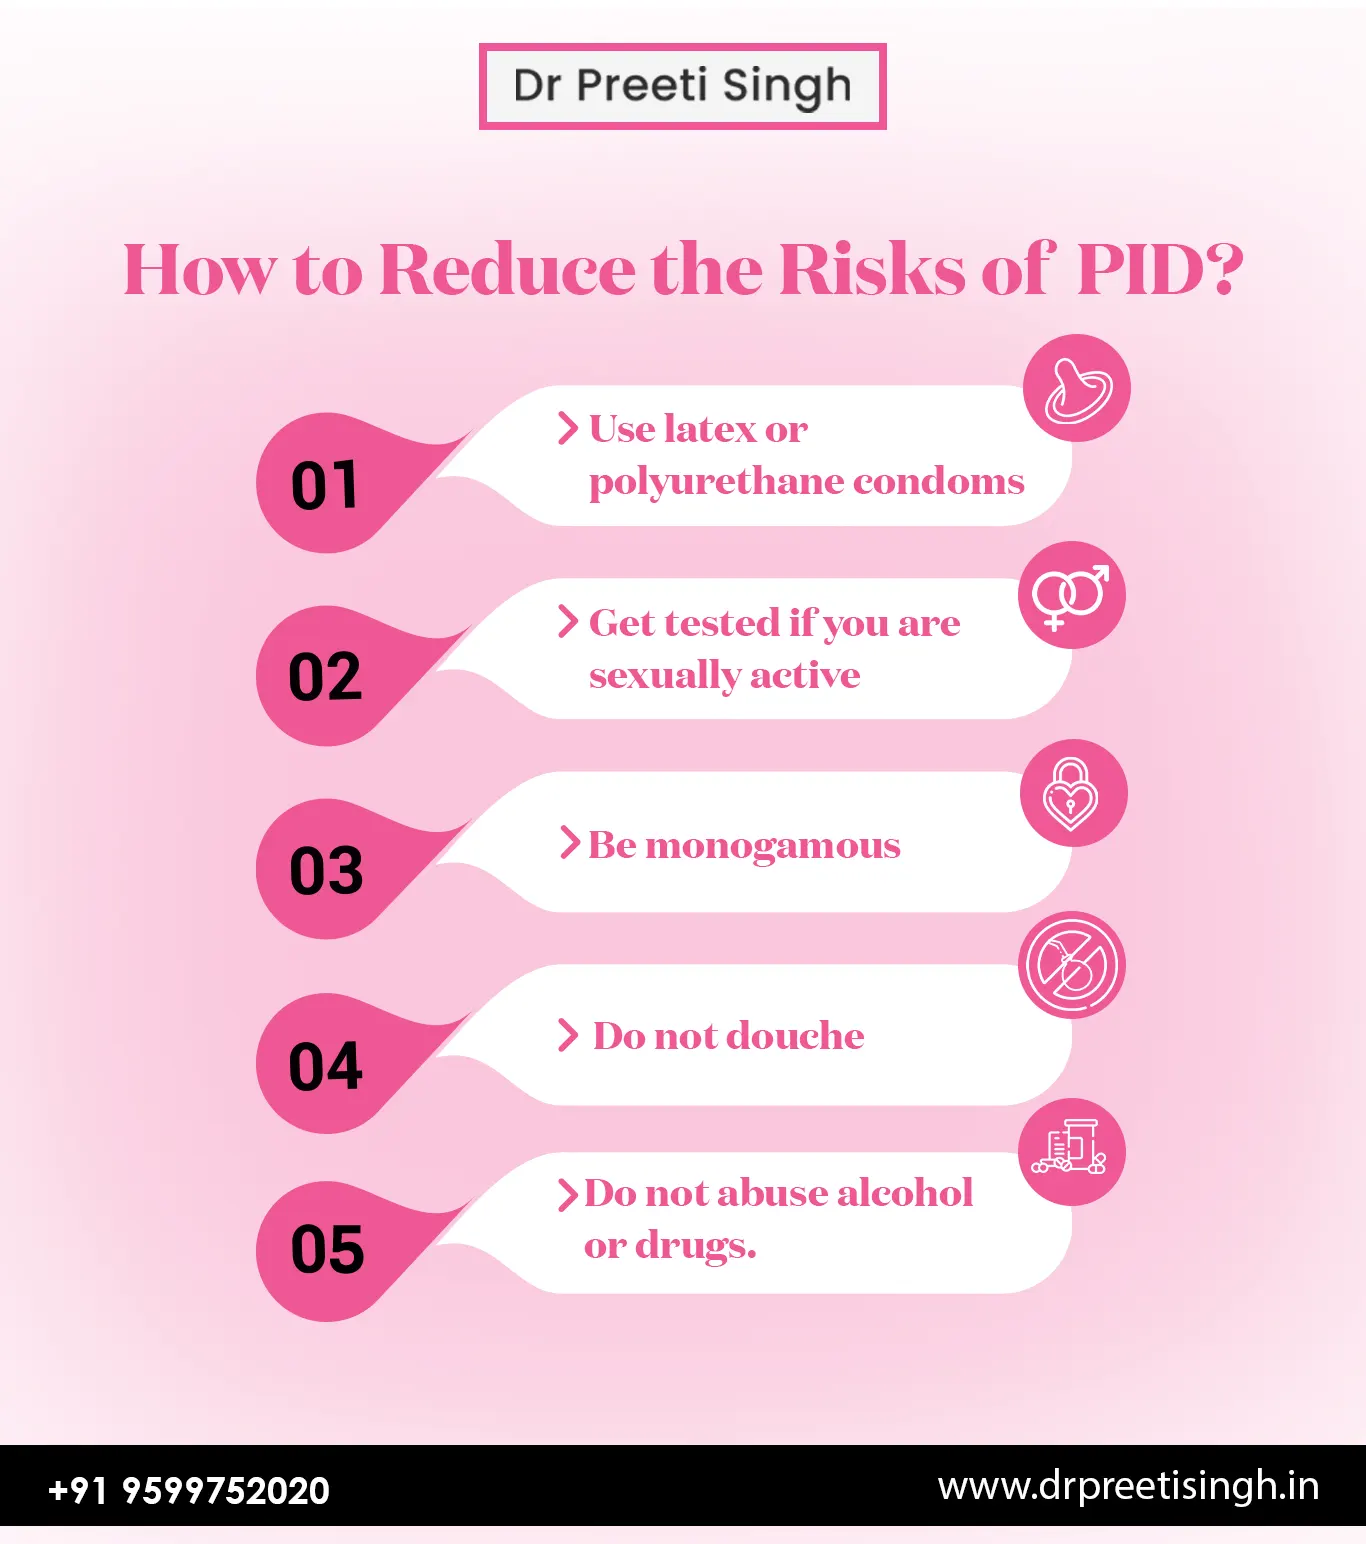 How to reduce the risks of pelvic inflammatory disease (PID)